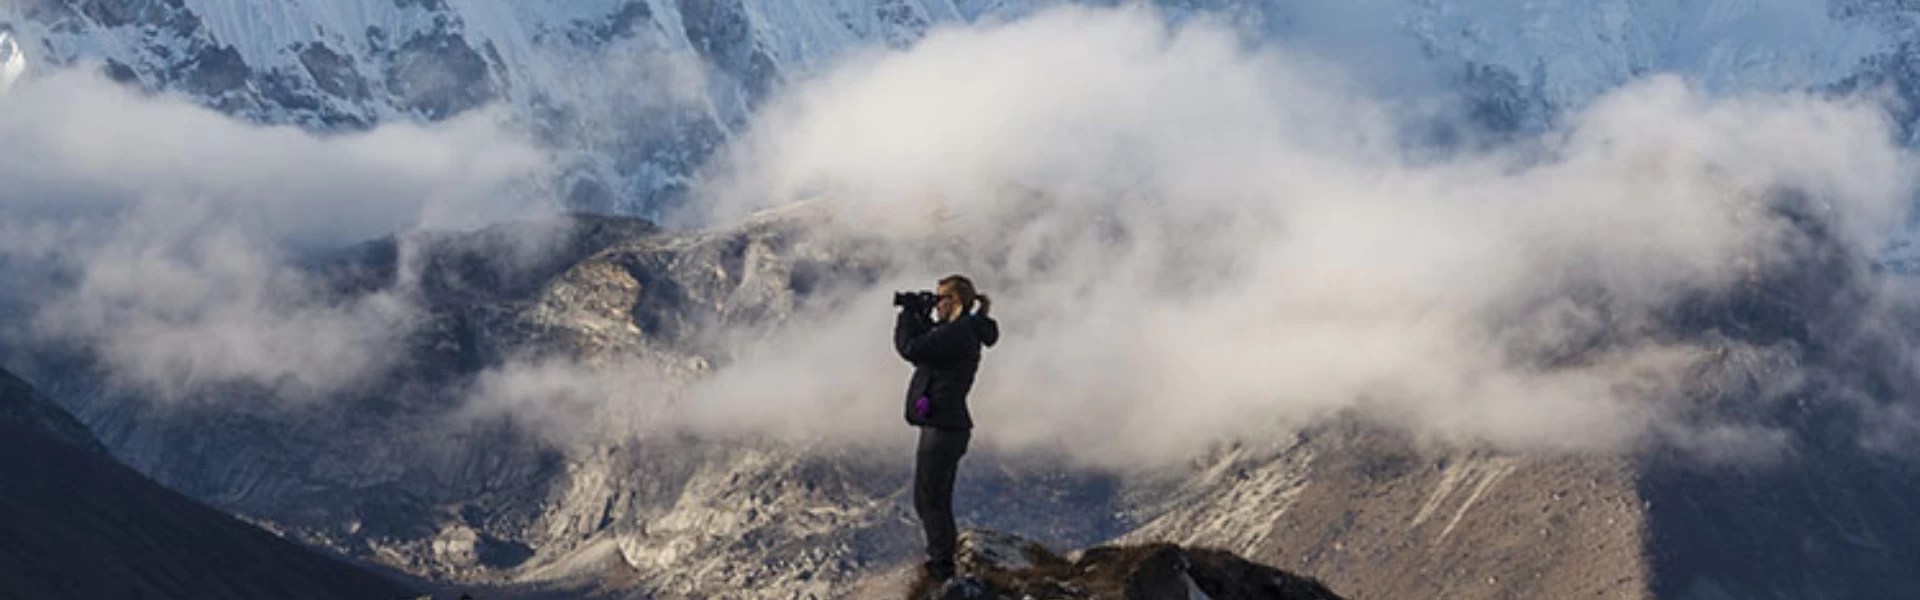 How to prevent Khumbu cough during the Everest base camp trek?